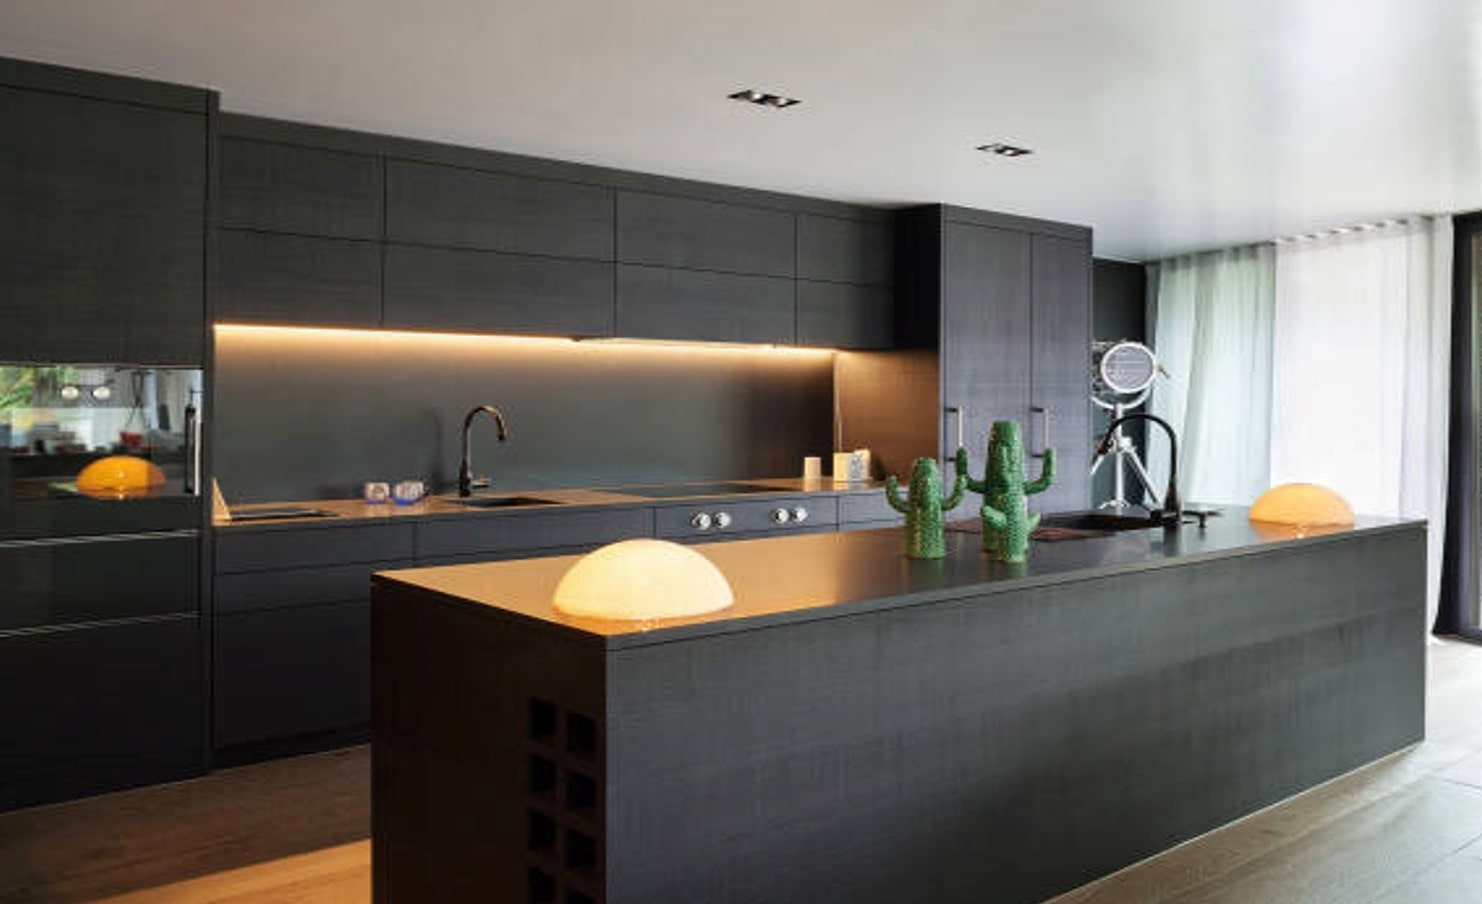 Kitchen with black cupboards and countertops lit with warm LED lighting